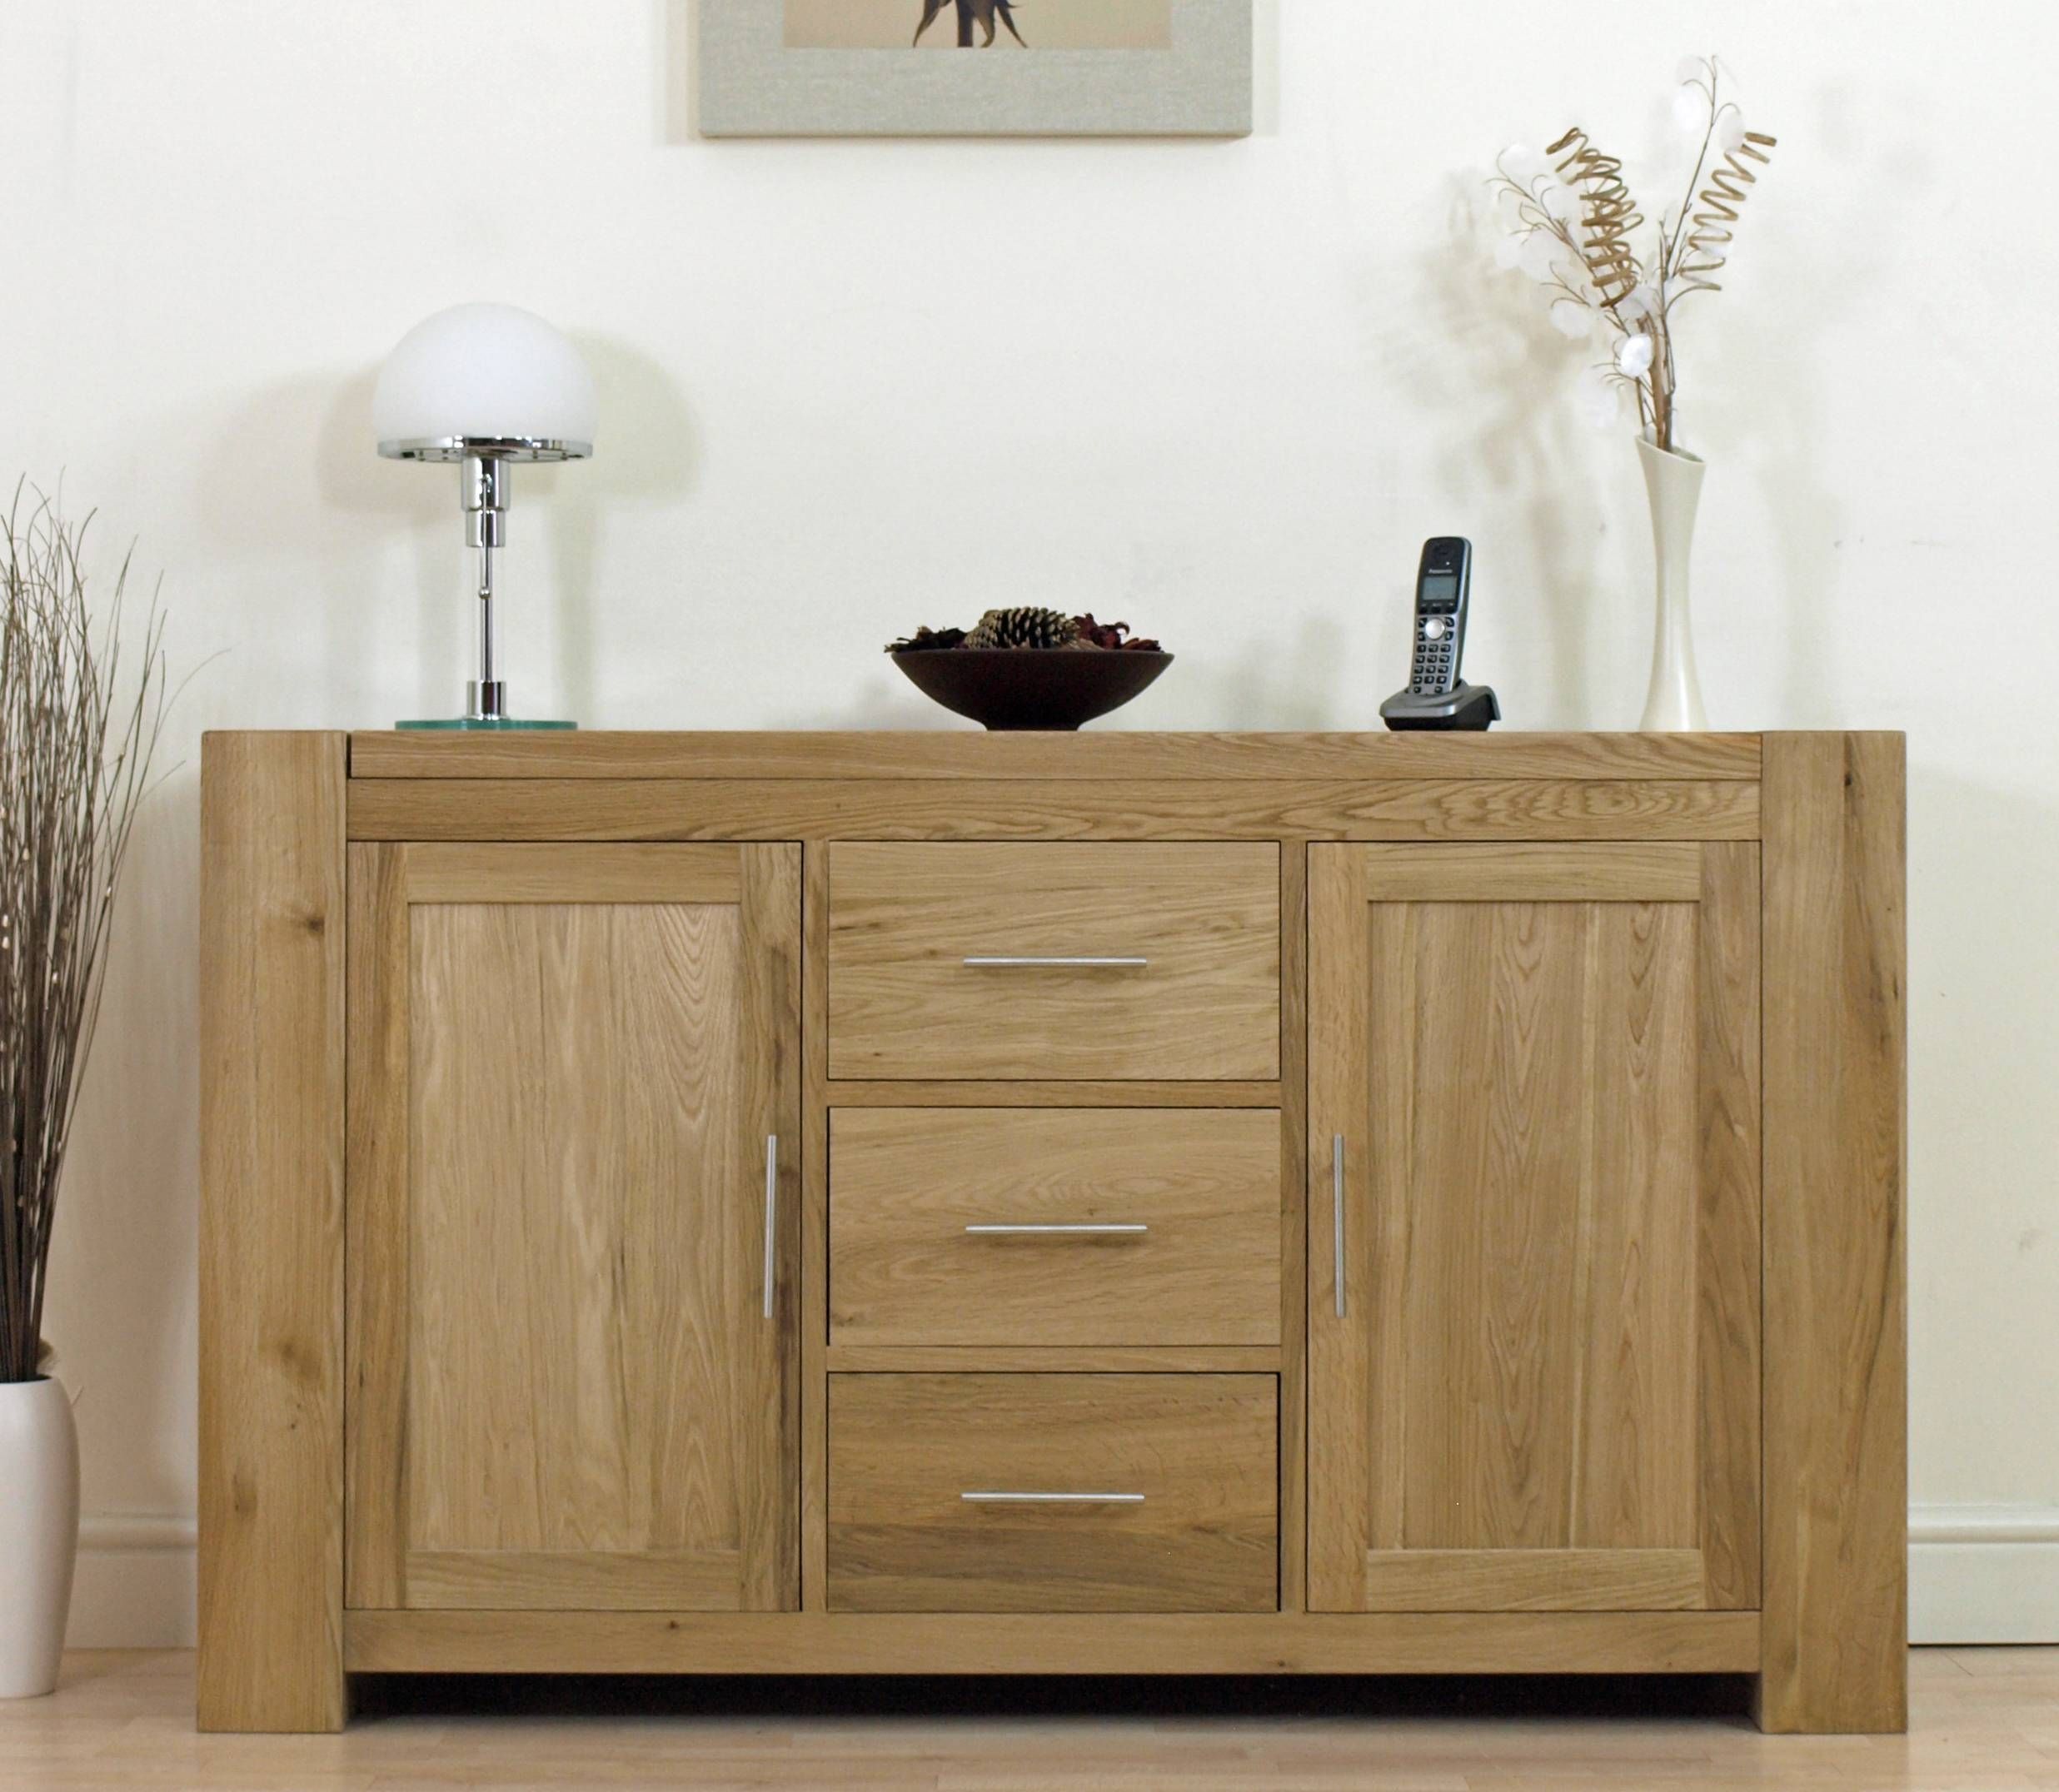 Solid Oak Sideboard Is Your First Choice Living Room Furniture – Hgnv With Most Popular Furniture Sideboards (View 11 of 15)